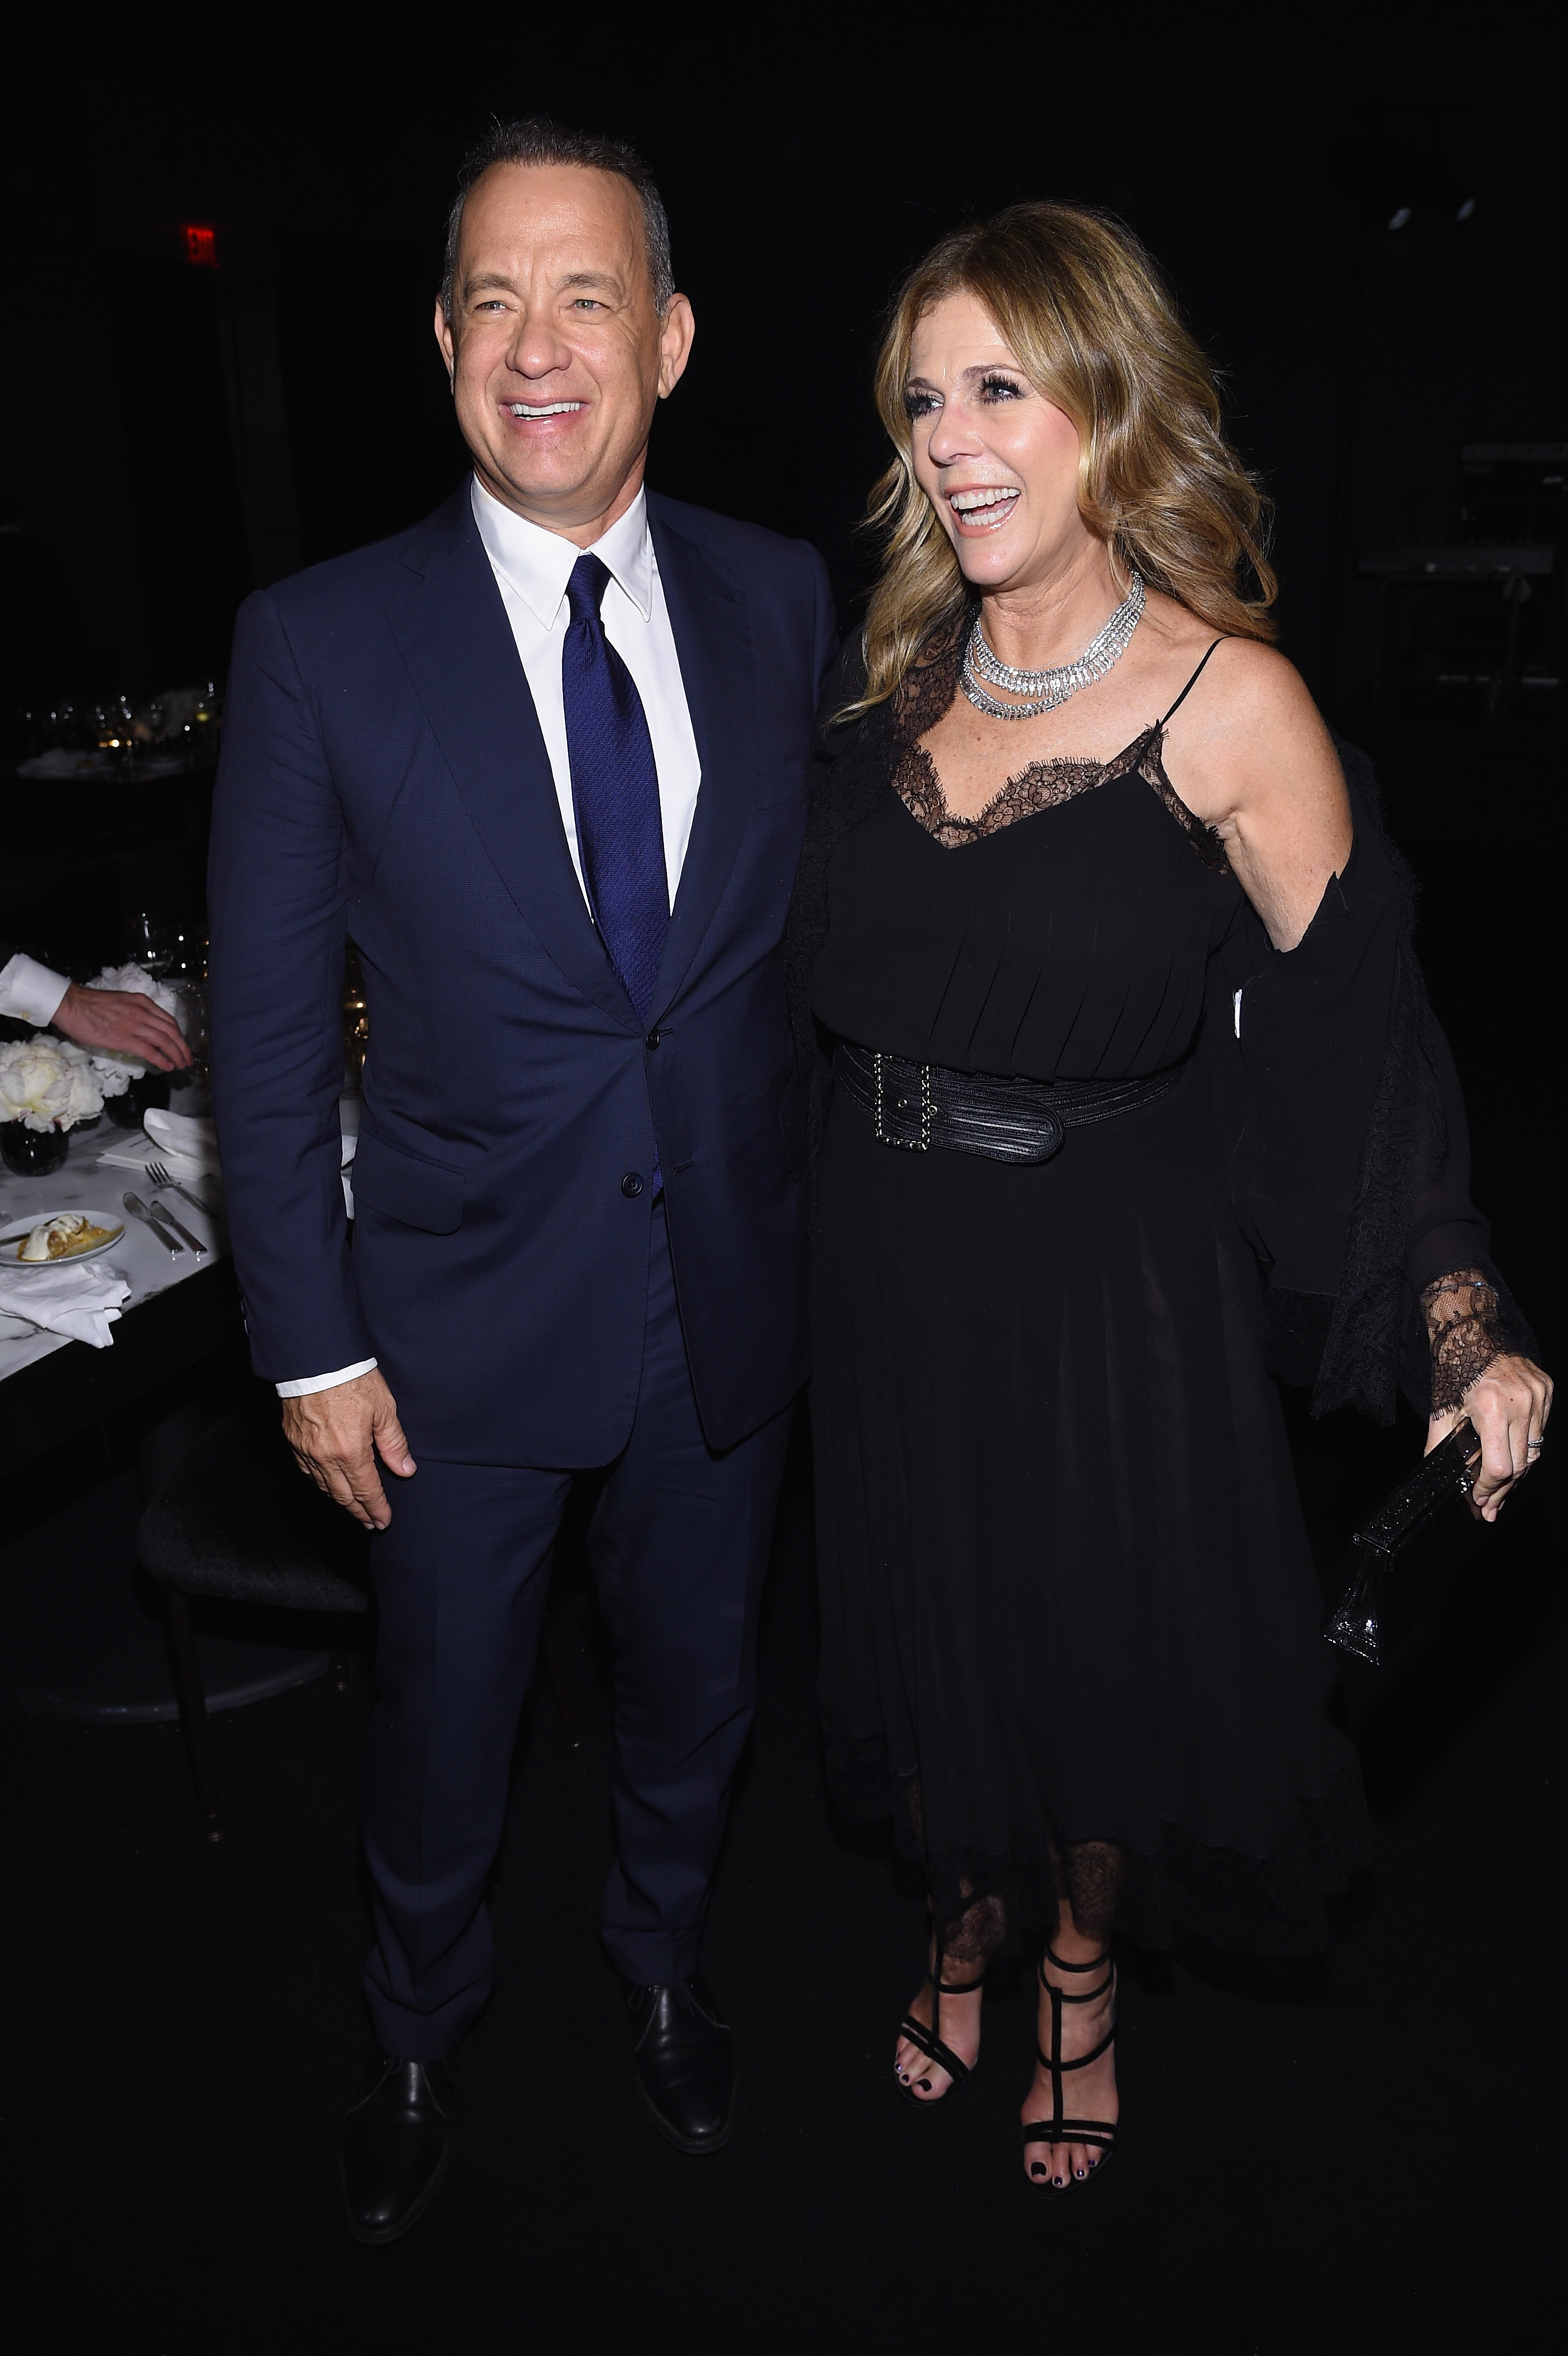 Tom Hanks and Rita Wilson at the MoMA Film Benefit in New York City on November 15, 2016 | Source: Getty Images